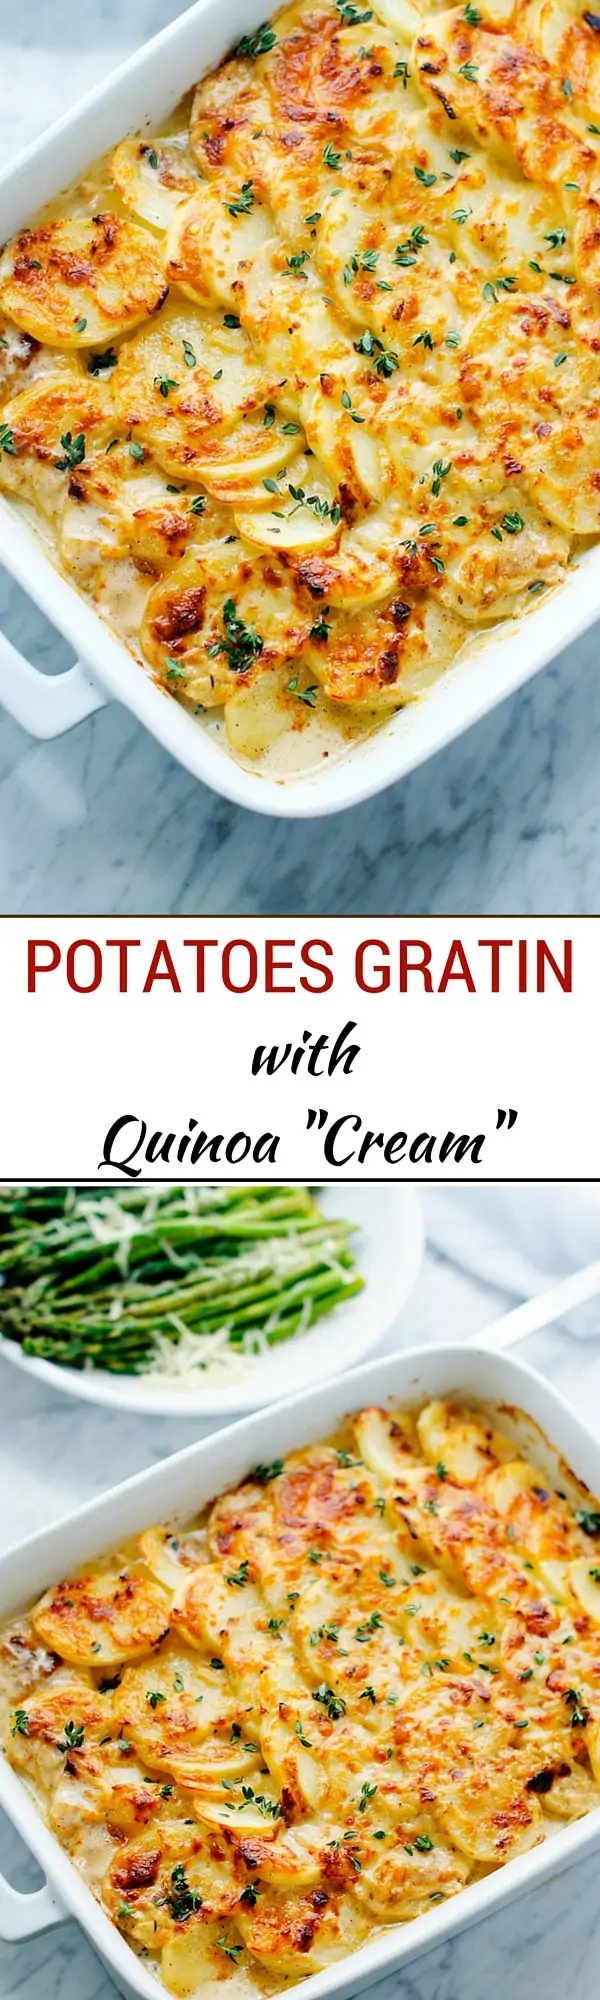 Goat Cheese Potatoes Gratin - The gratin is so indulgent but made healthier with the addition of quinoa cream!